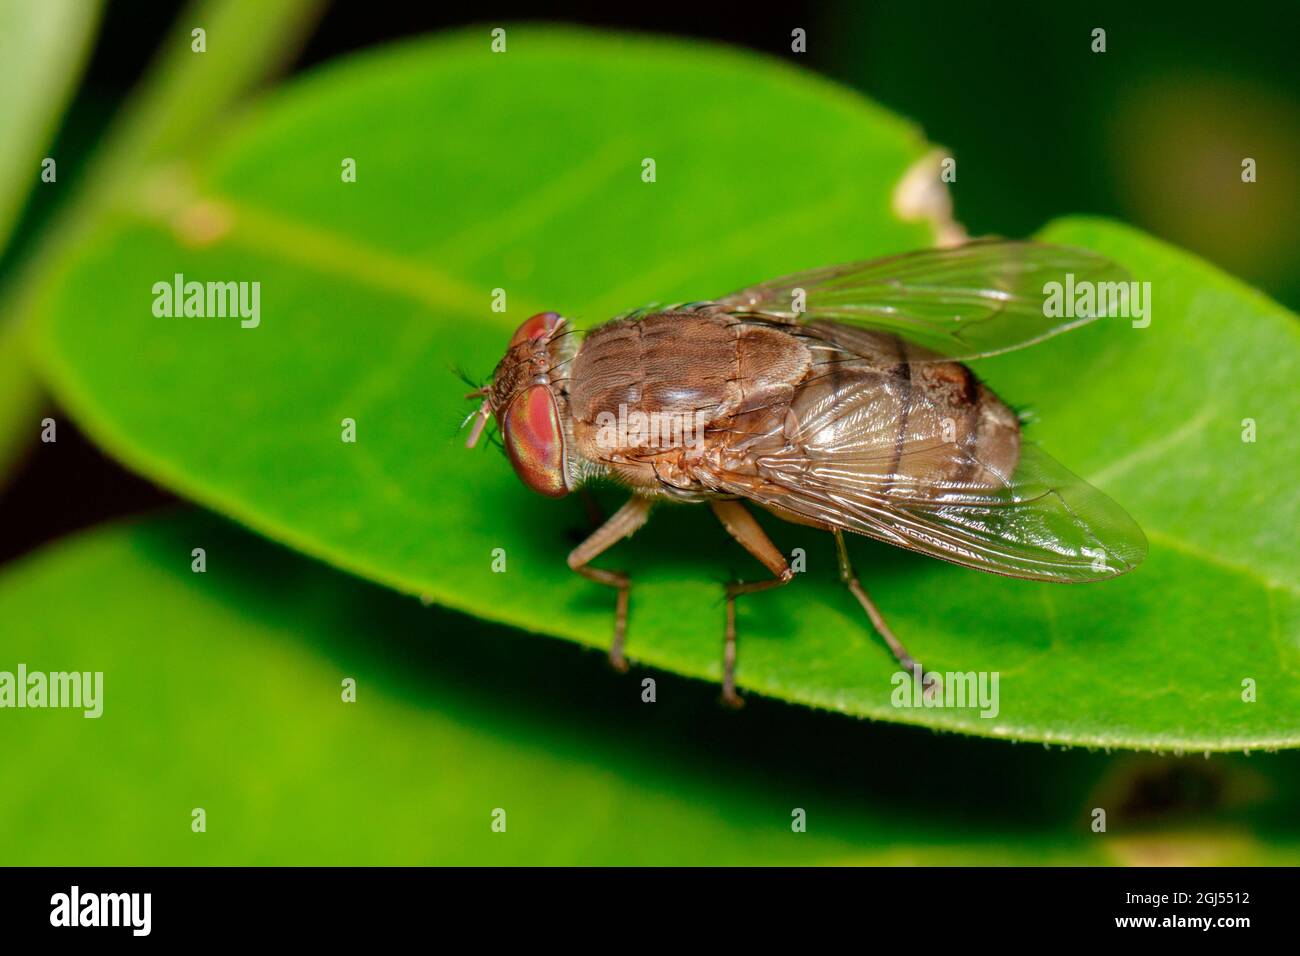 Image of a flies (Diptera) on green leaves. Insect. Animal Stock Photo